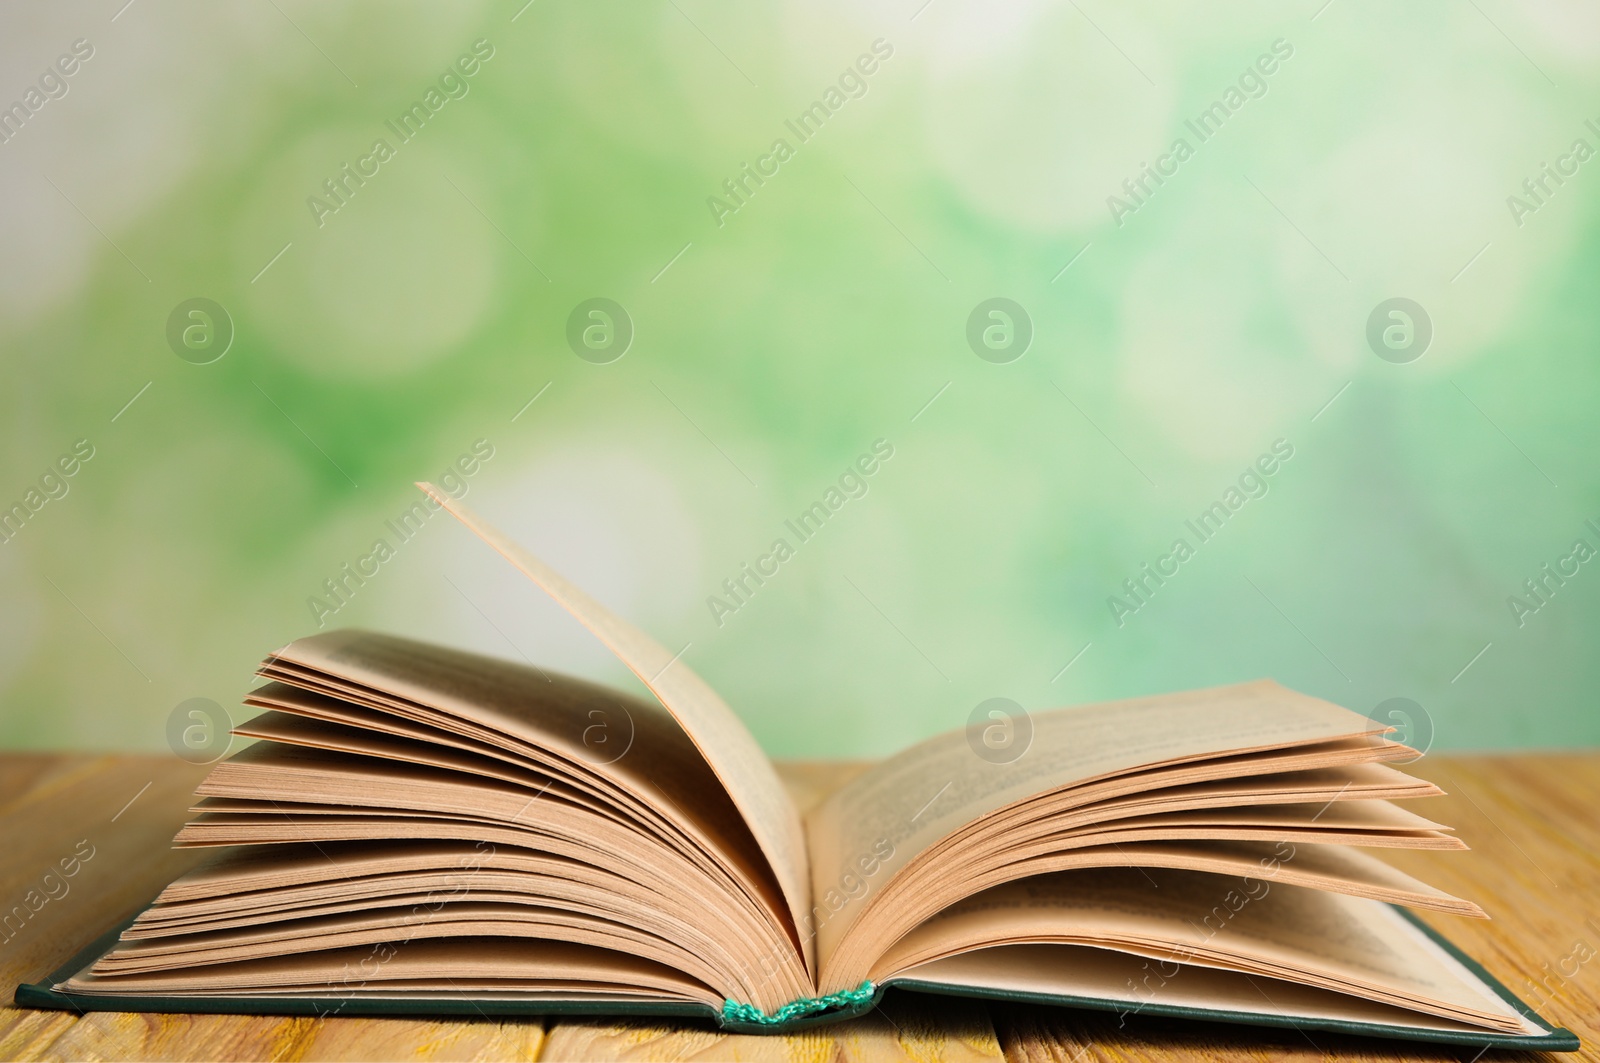 Photo of Open book on wooden table against blurred green background. Space for text